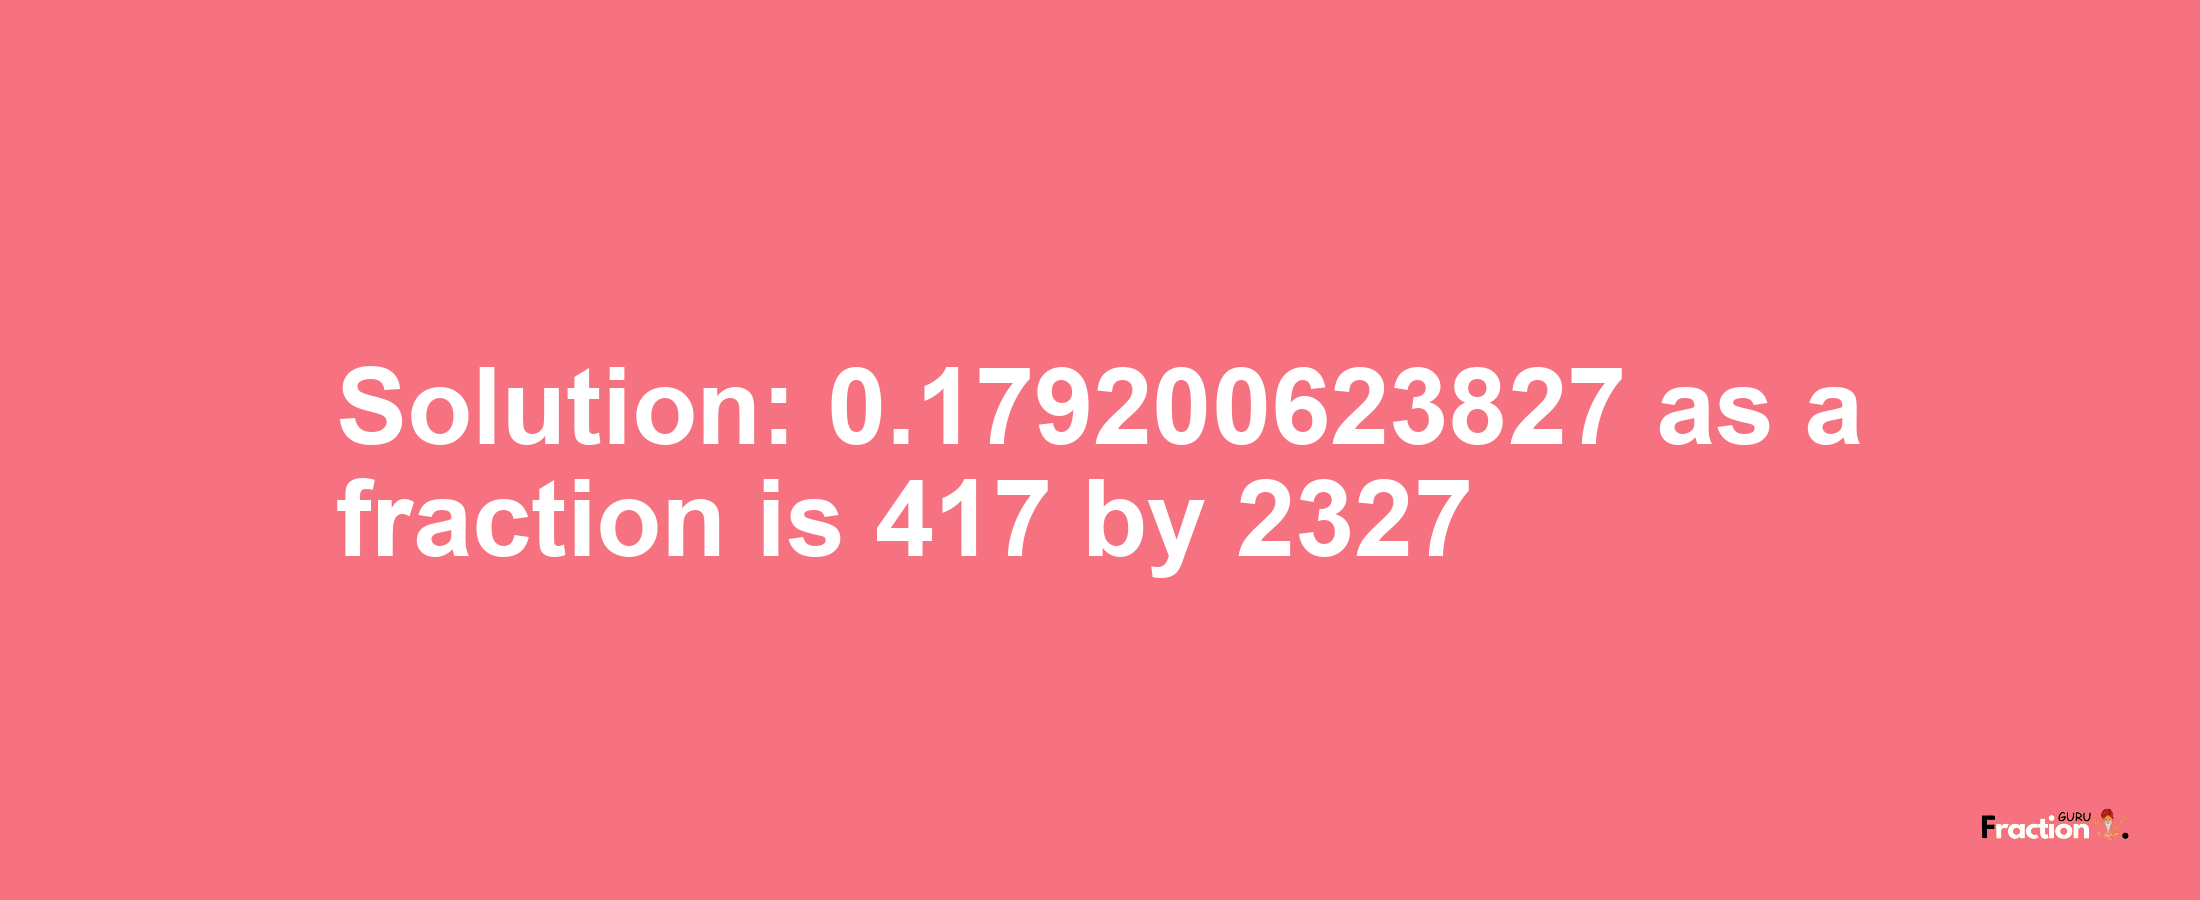 Solution:0.179200623827 as a fraction is 417/2327